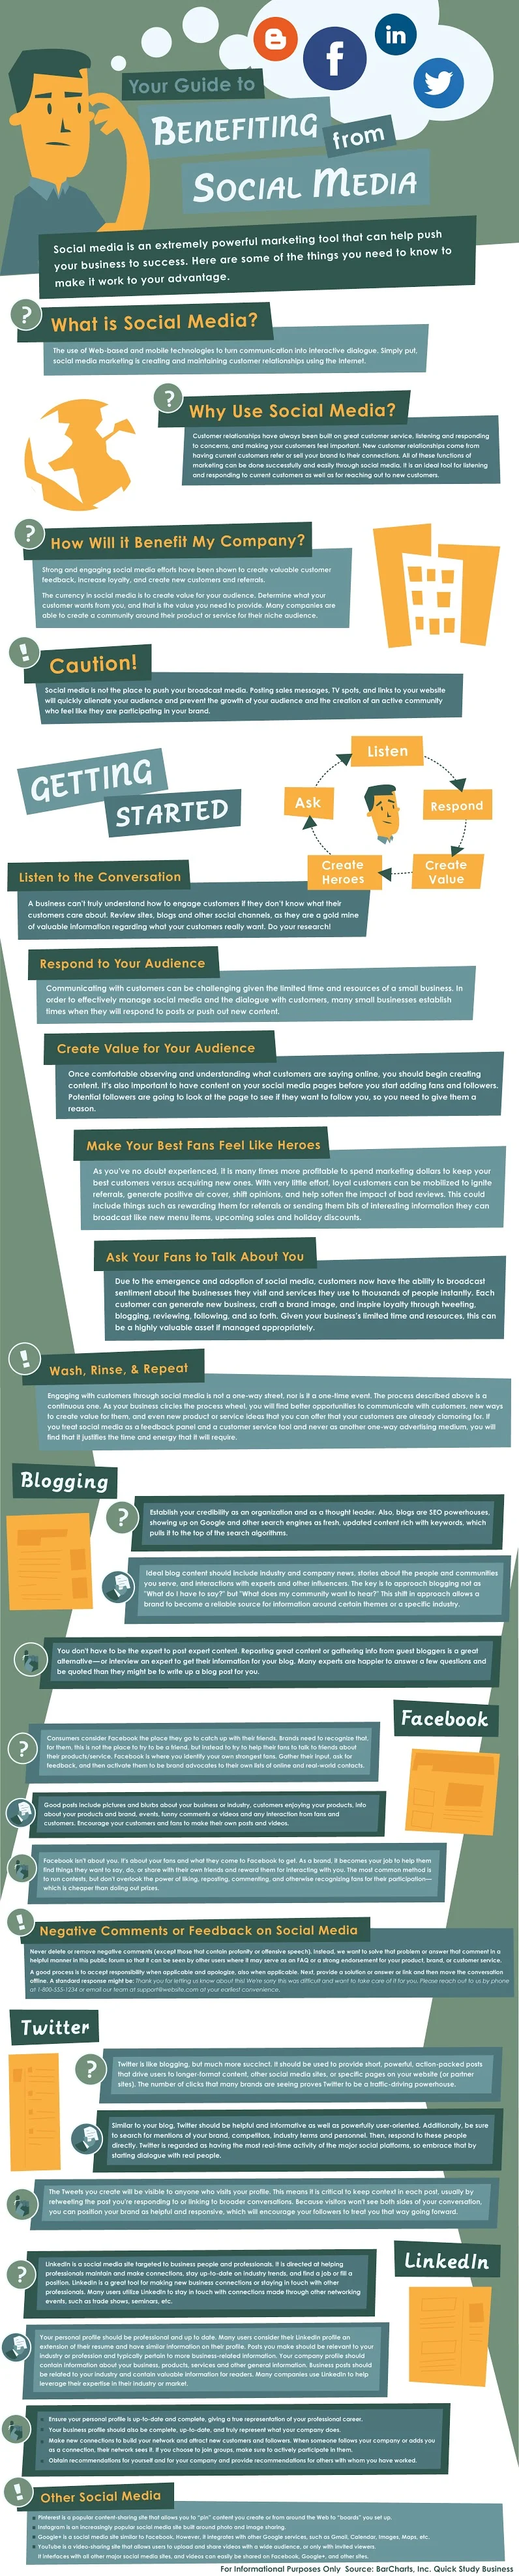 How to Get Your Business Started on Social Media marketing (Infographic)